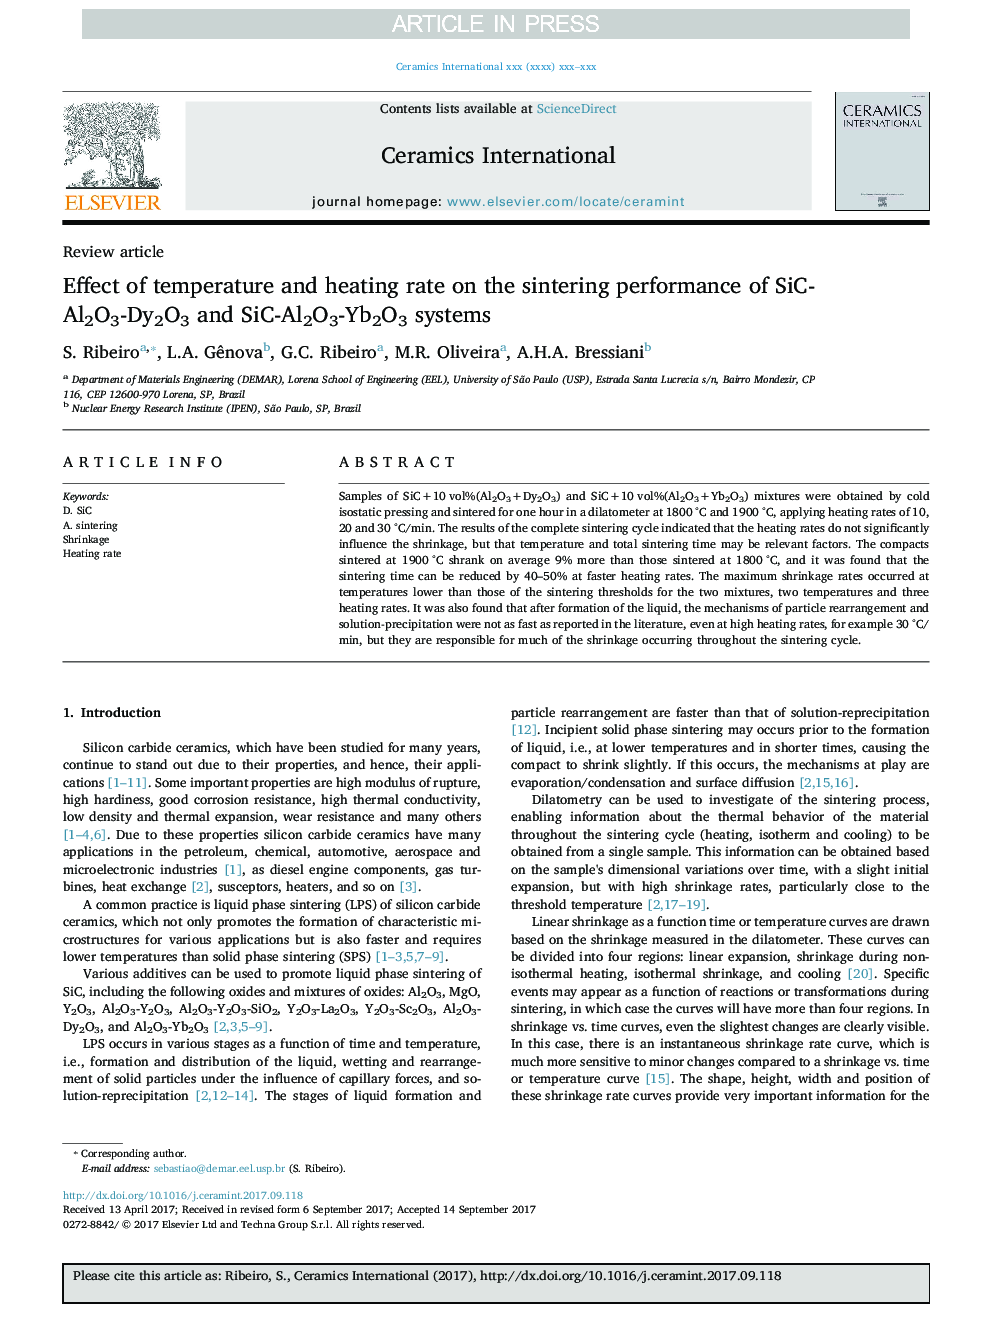 Effect of temperature and heating rate on the sintering performance of SiC-Al2O3-Dy2O3 and SiC-Al2O3-Yb2O3 systems